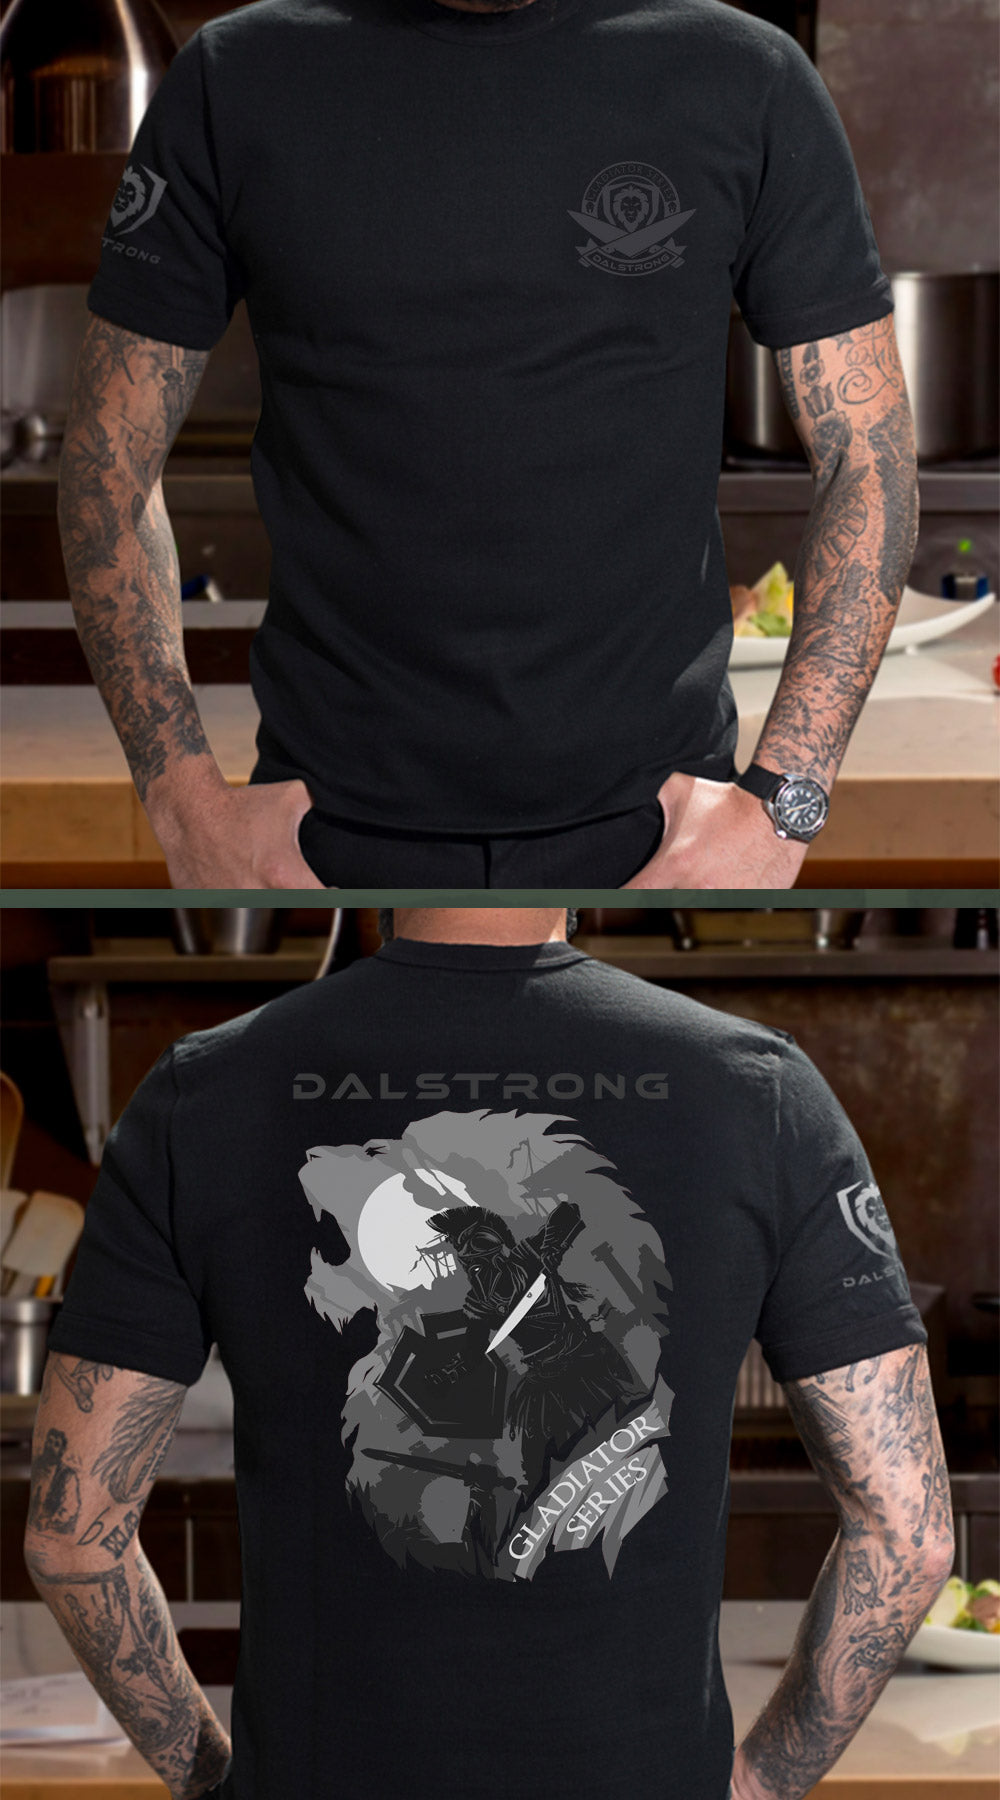 Dalstrong fight for glory tee black front and back preview.